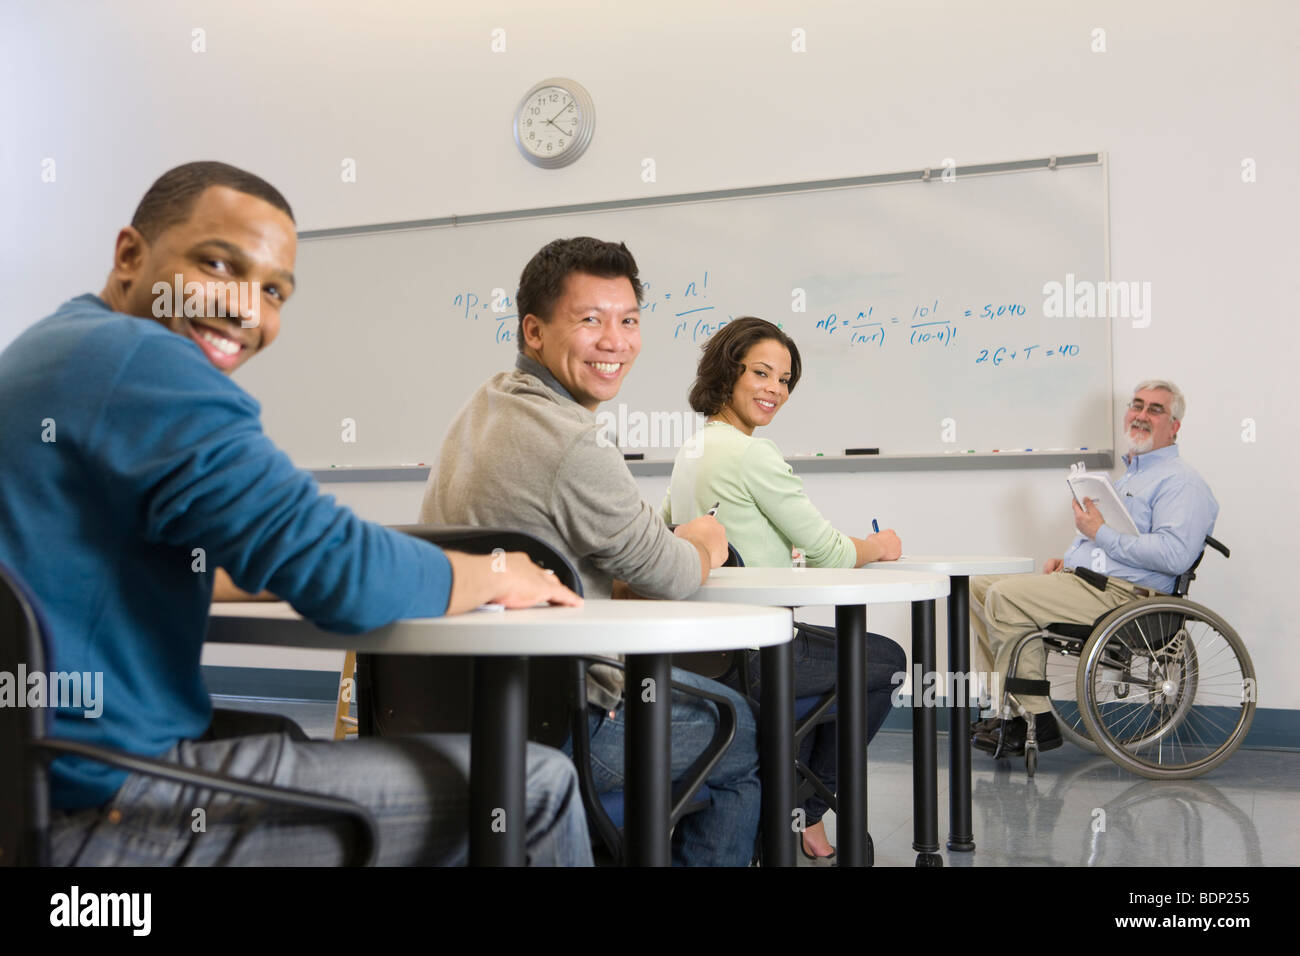 University professor and students in a classroom Stock Photo